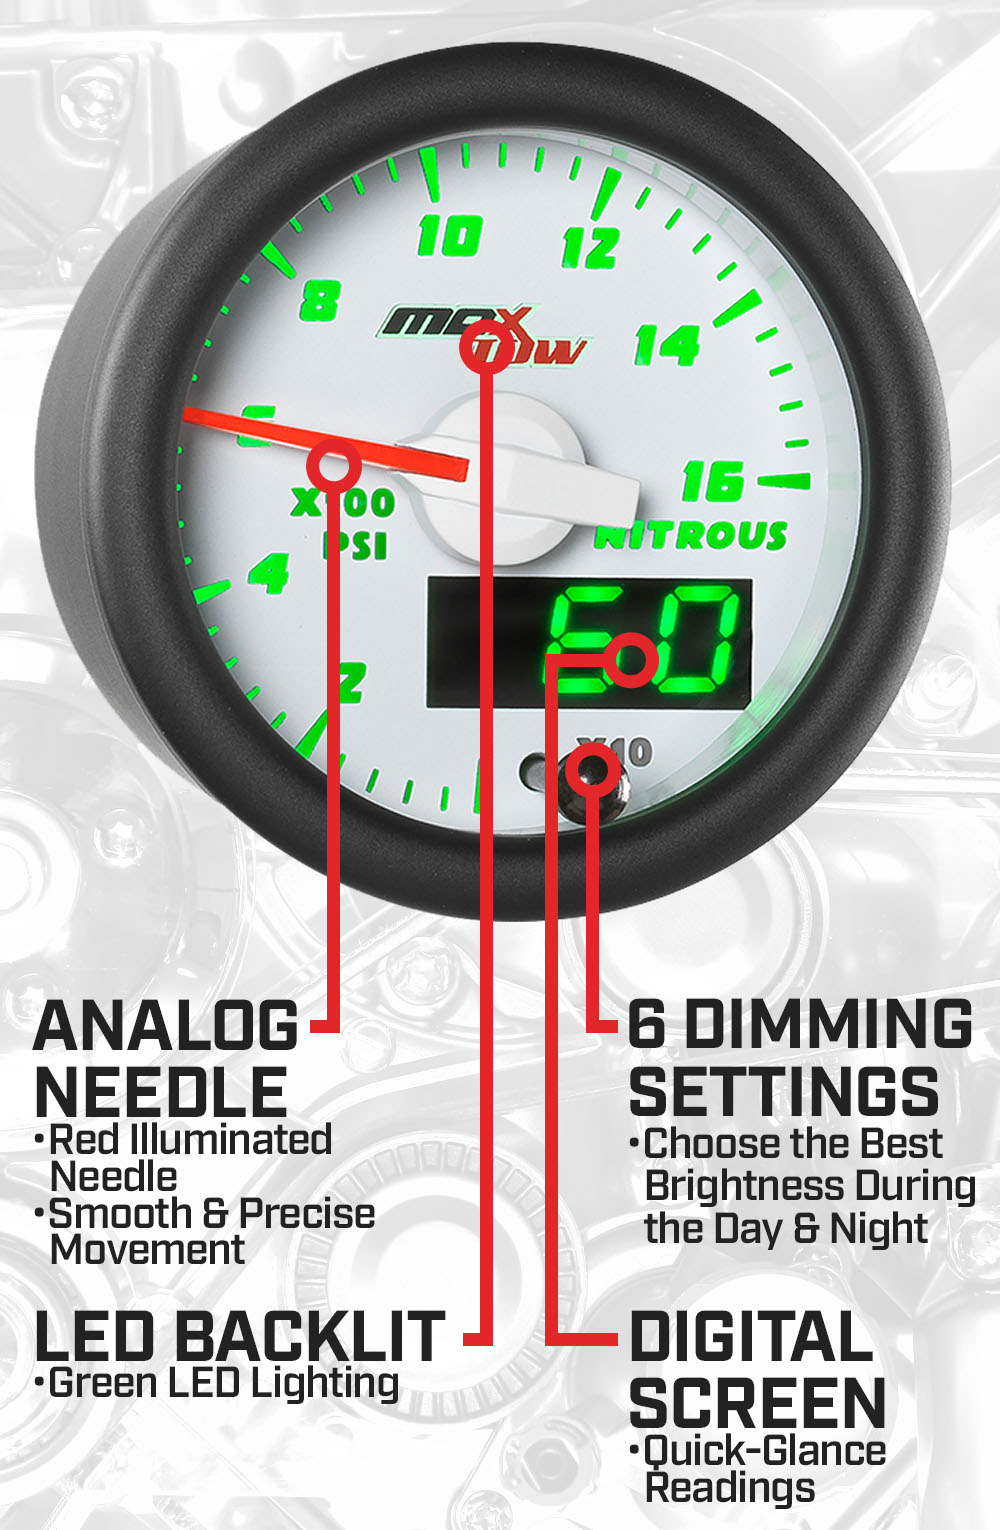 White & Green Double Vision Nitrous Oxide Pressure Gauge Features